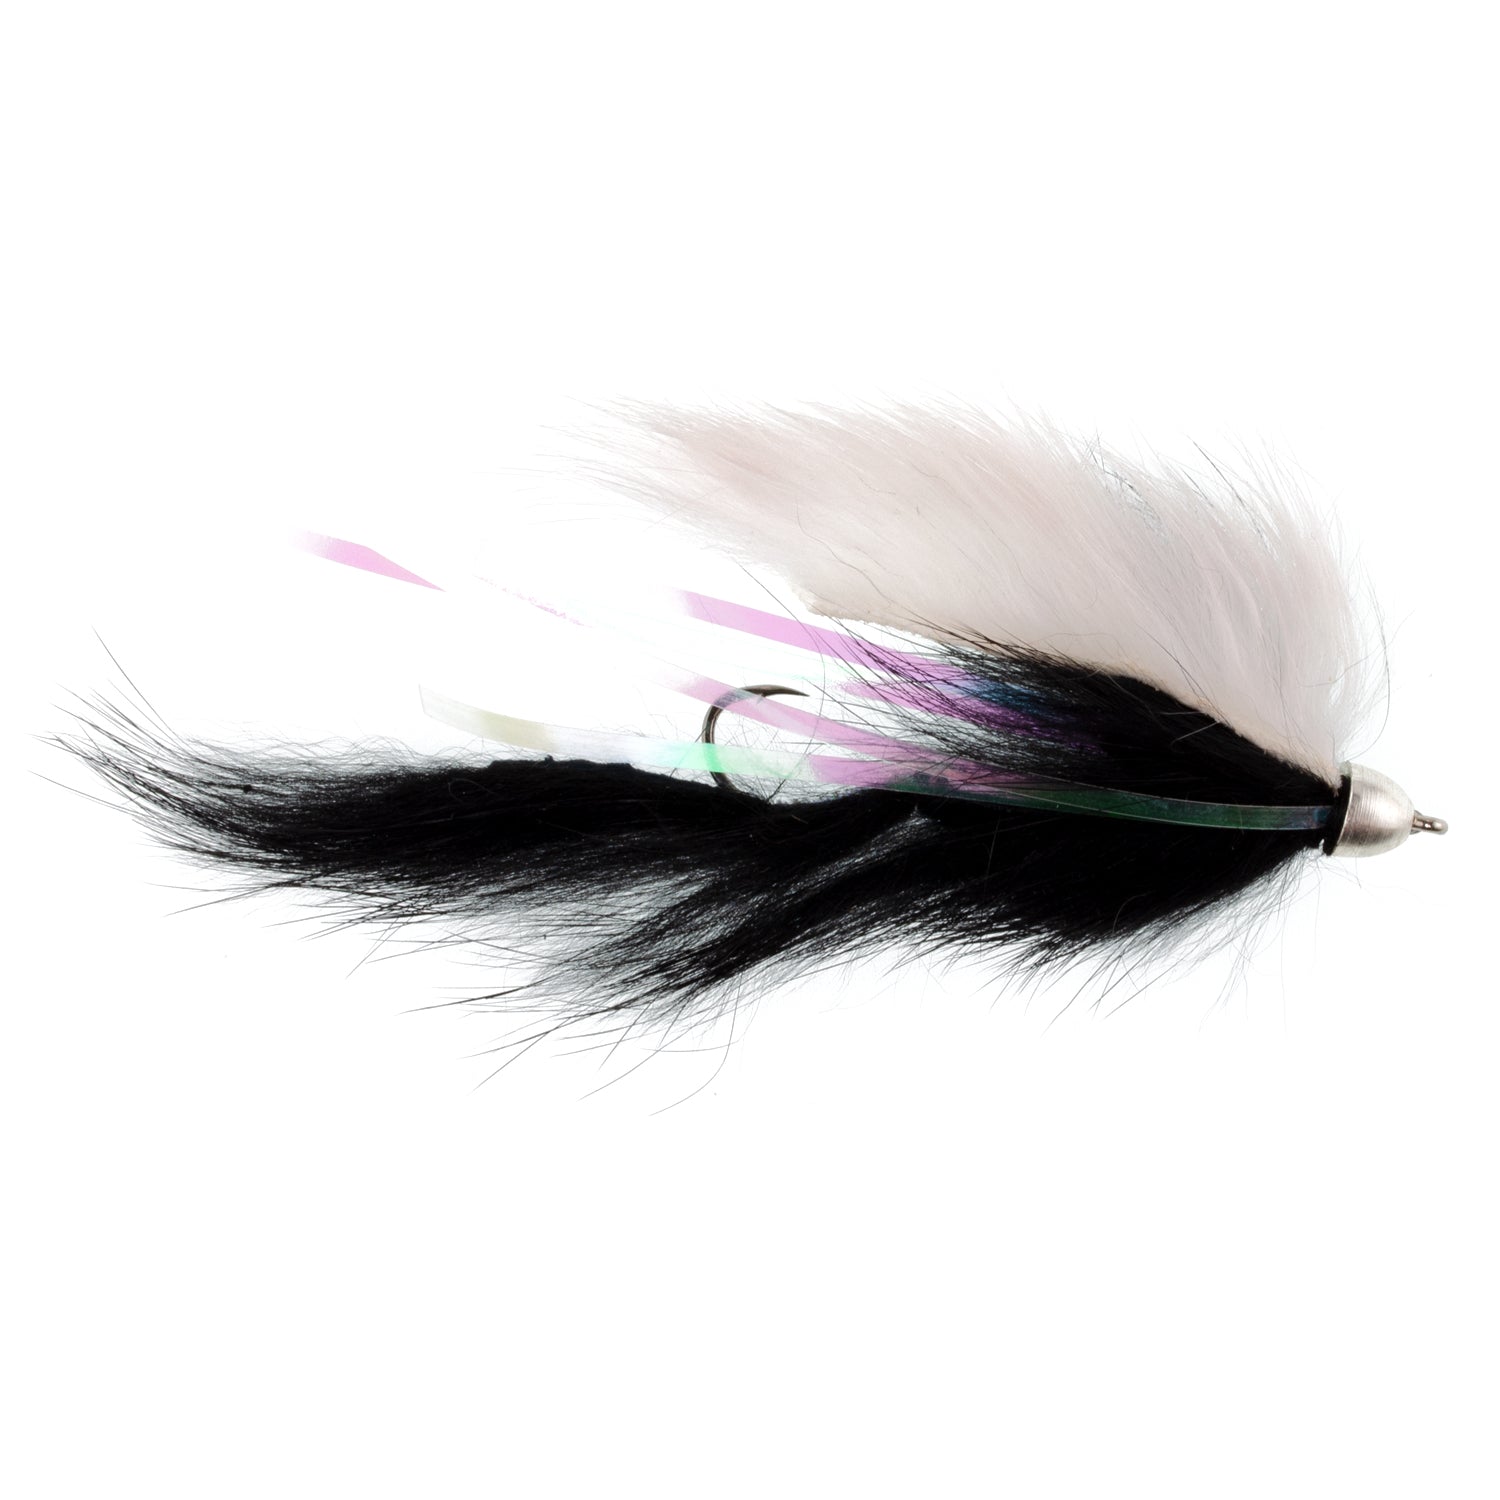 The Fly Fishing Place Dolly Llama Stinger Streamer Flies - 3 Black and White Salmon Steelhead Trout Alaska Fly Fishing Flies - Hook Size 4